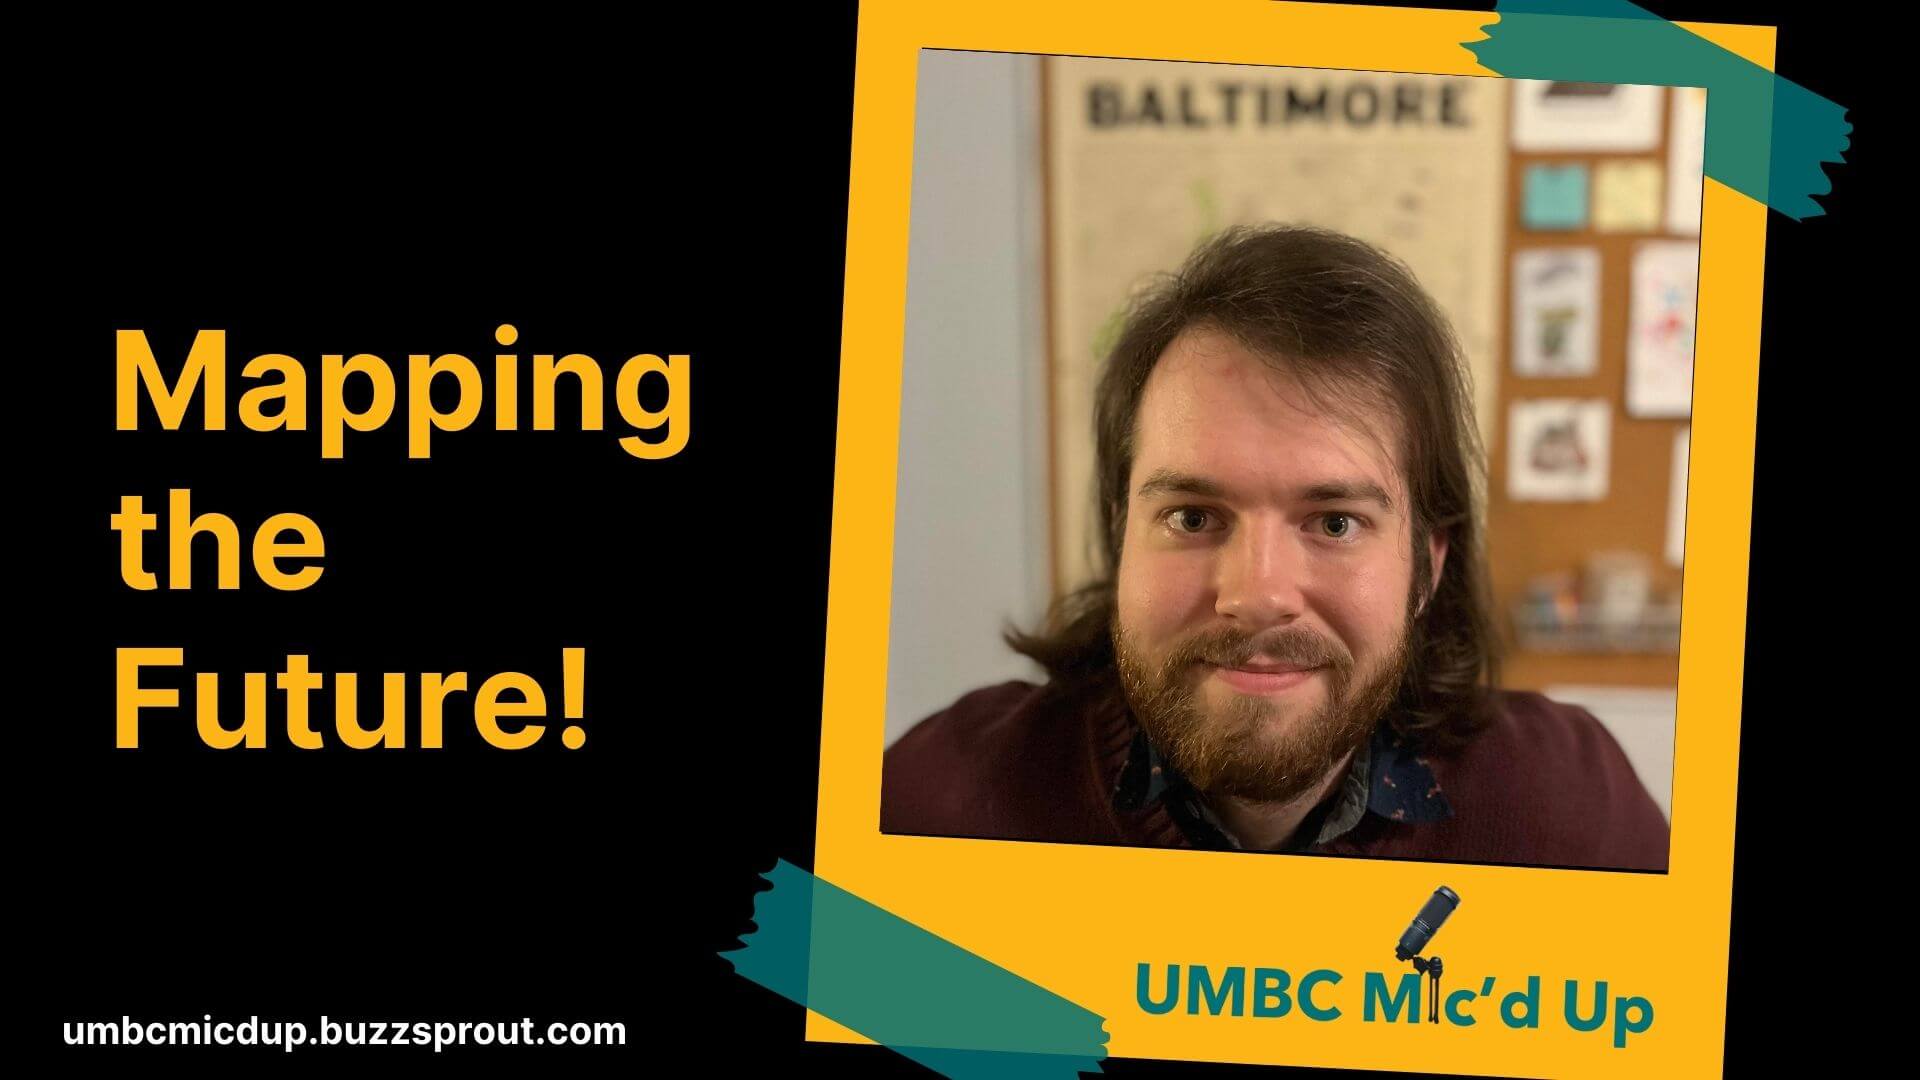 UMBC MIc'd Up Podcast guests shows how GIS Applications in Society help to improve life.